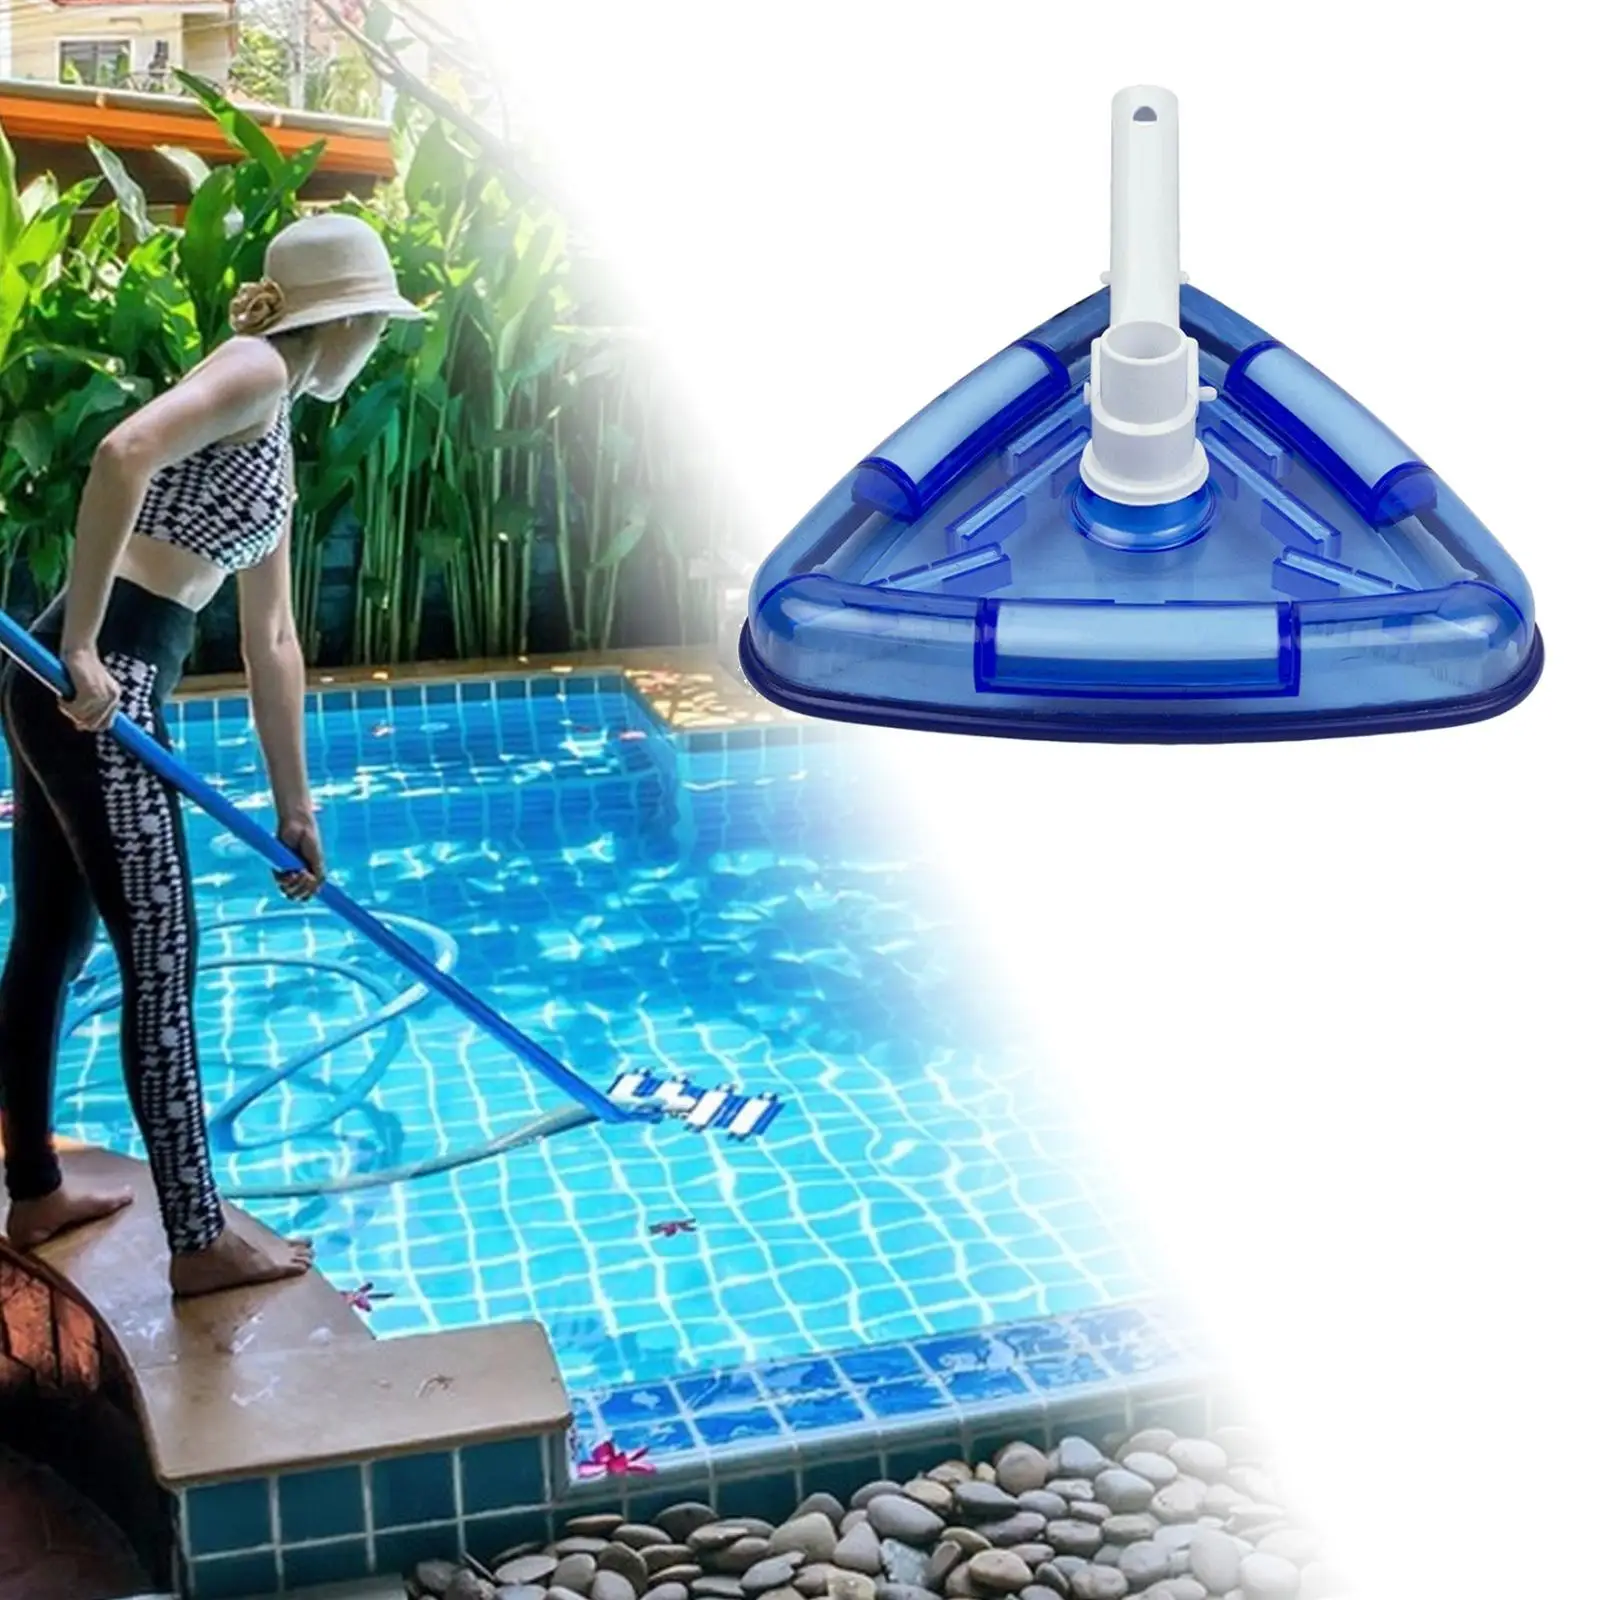 Transparent Triangular Pool Vacuum Head with Swivel Hose Connection, SPA Pool Suction Head for above Ground Pools